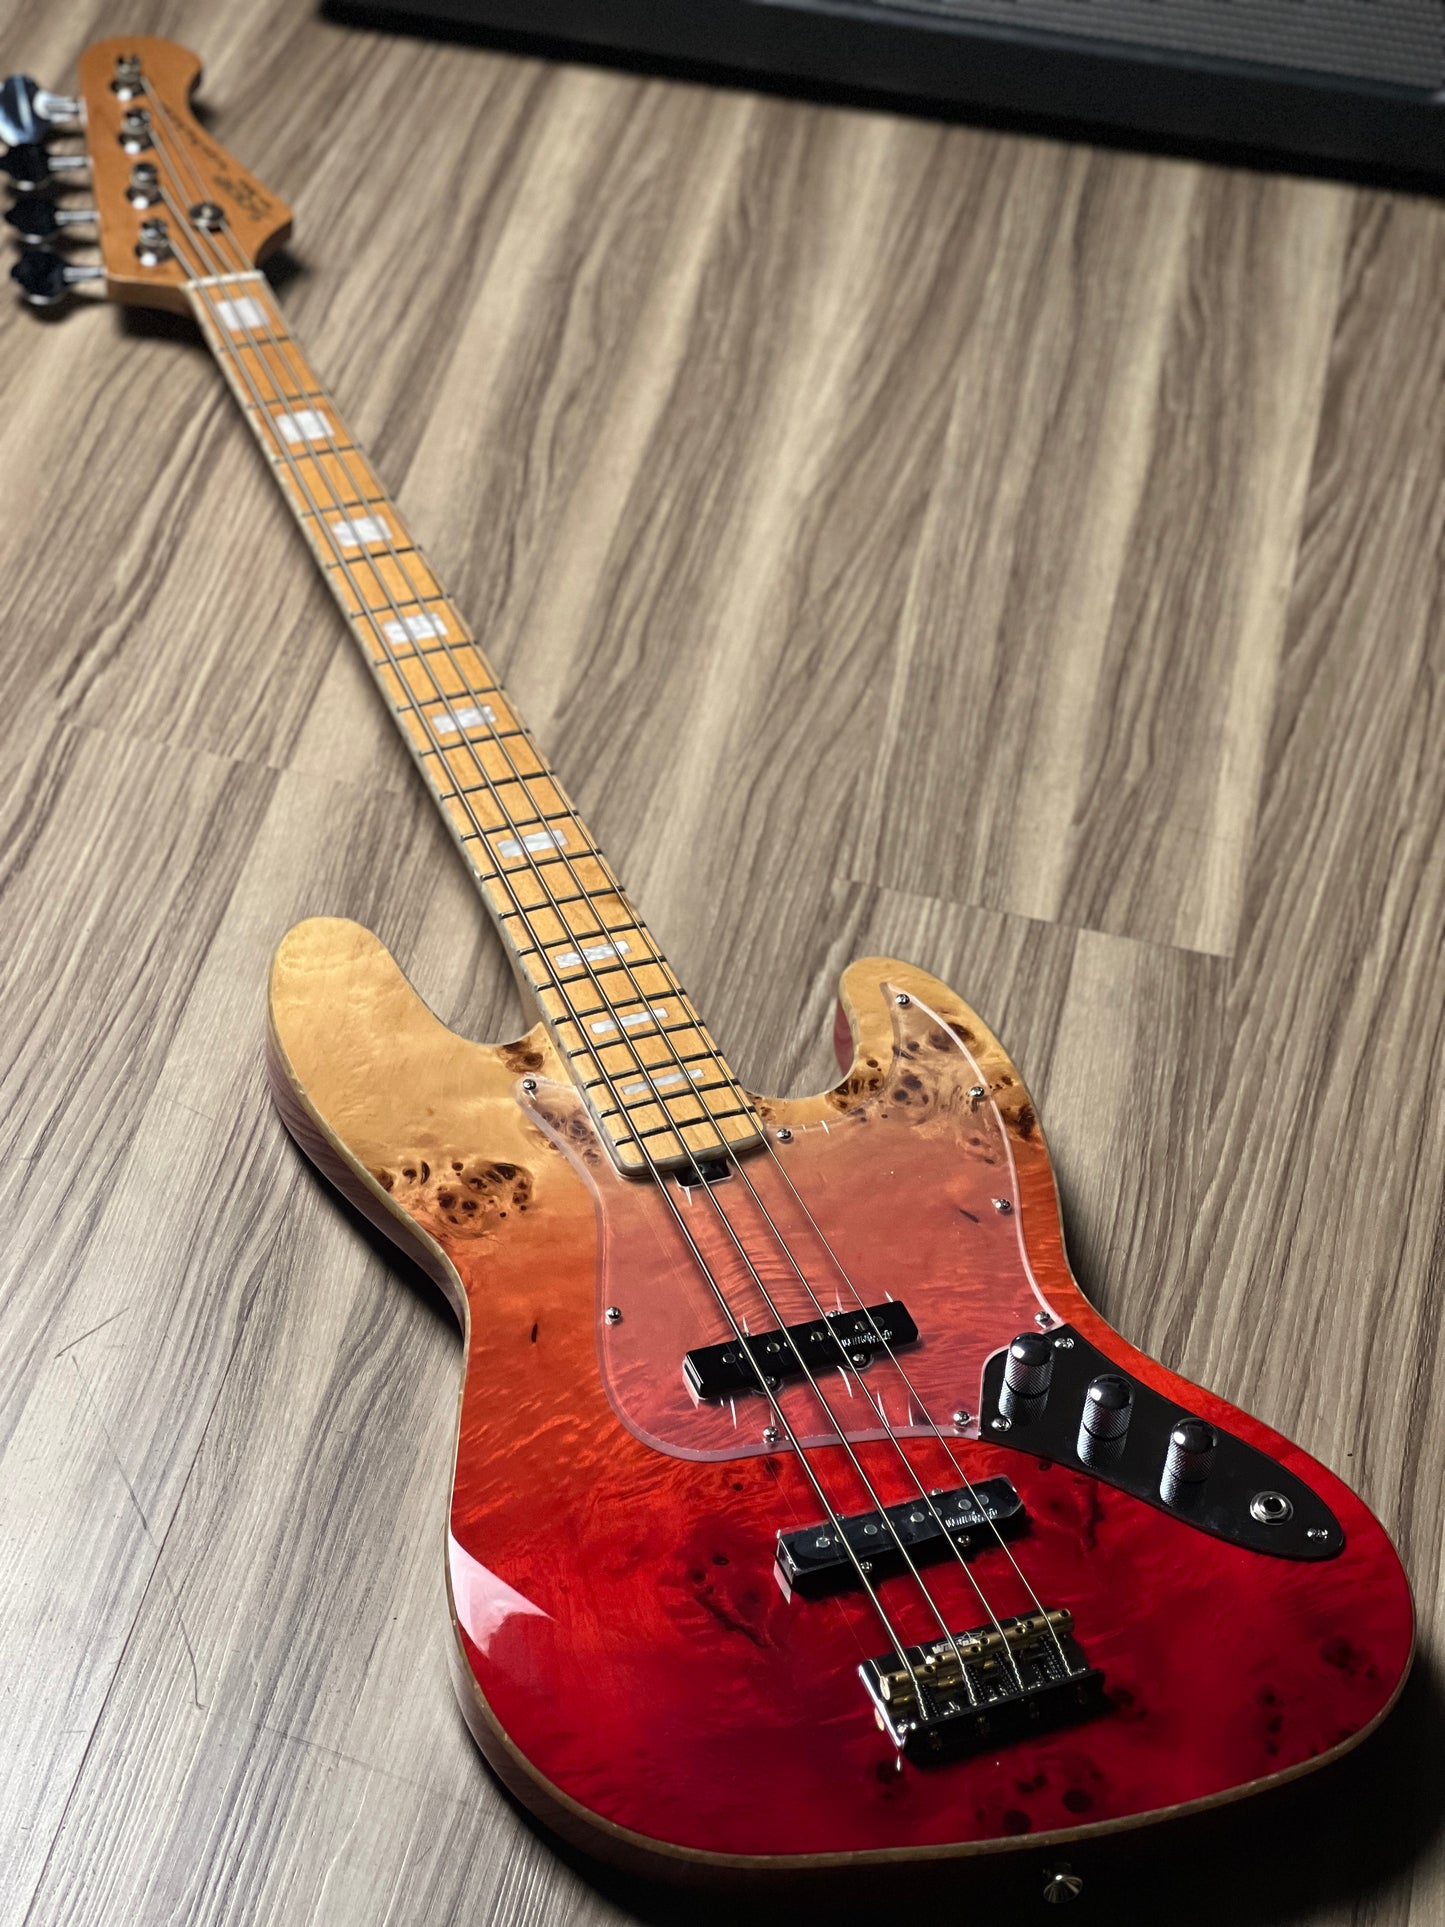 SQOE SJB700 Roasted Maple Series in Lava Red Fade